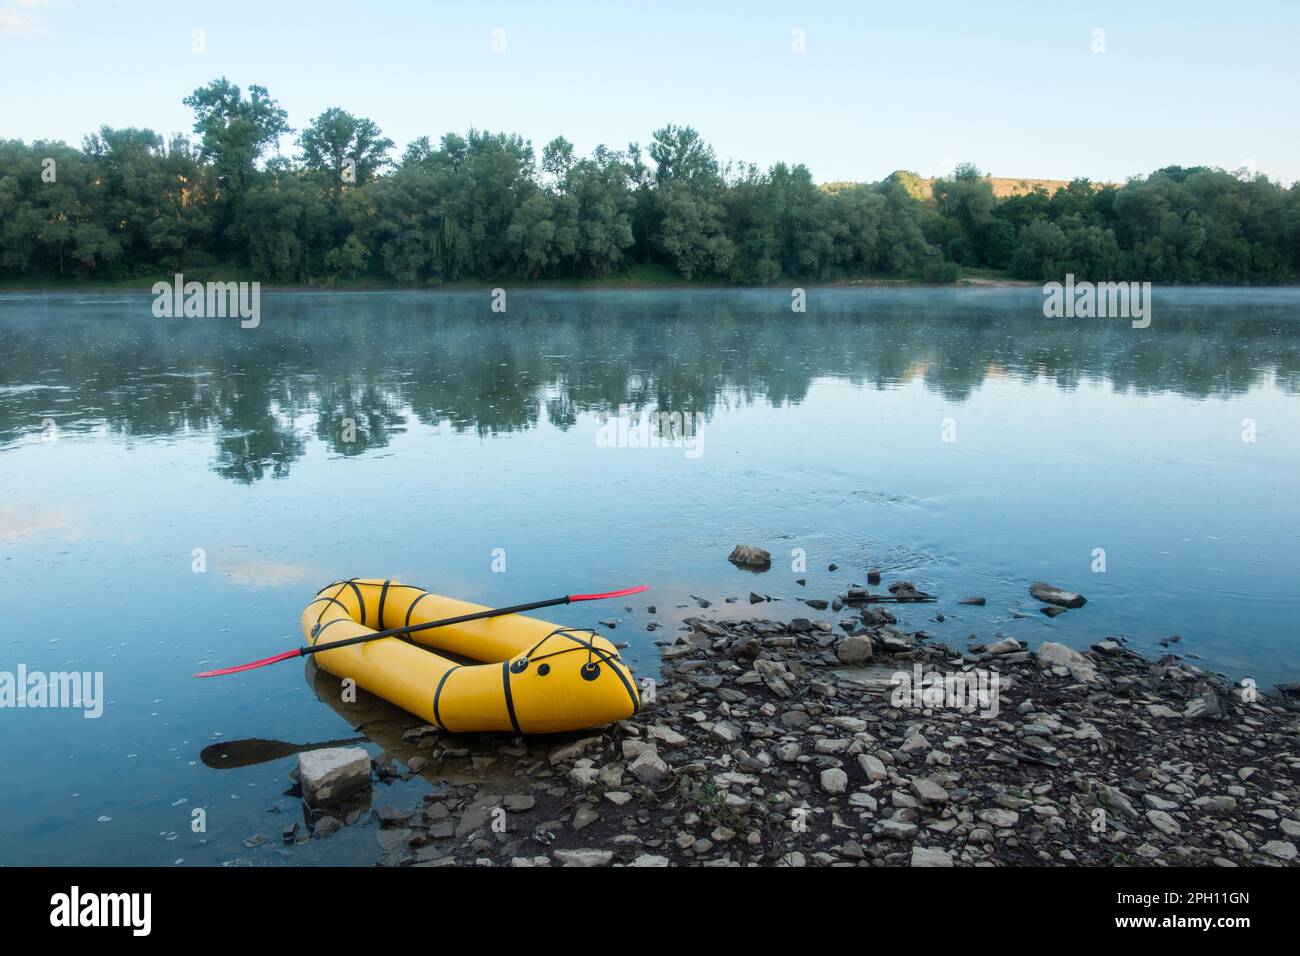 Packrafting concept with yellow packraft boat on a calm sunrise river with morning fog. Active lifestile background Stock Photo